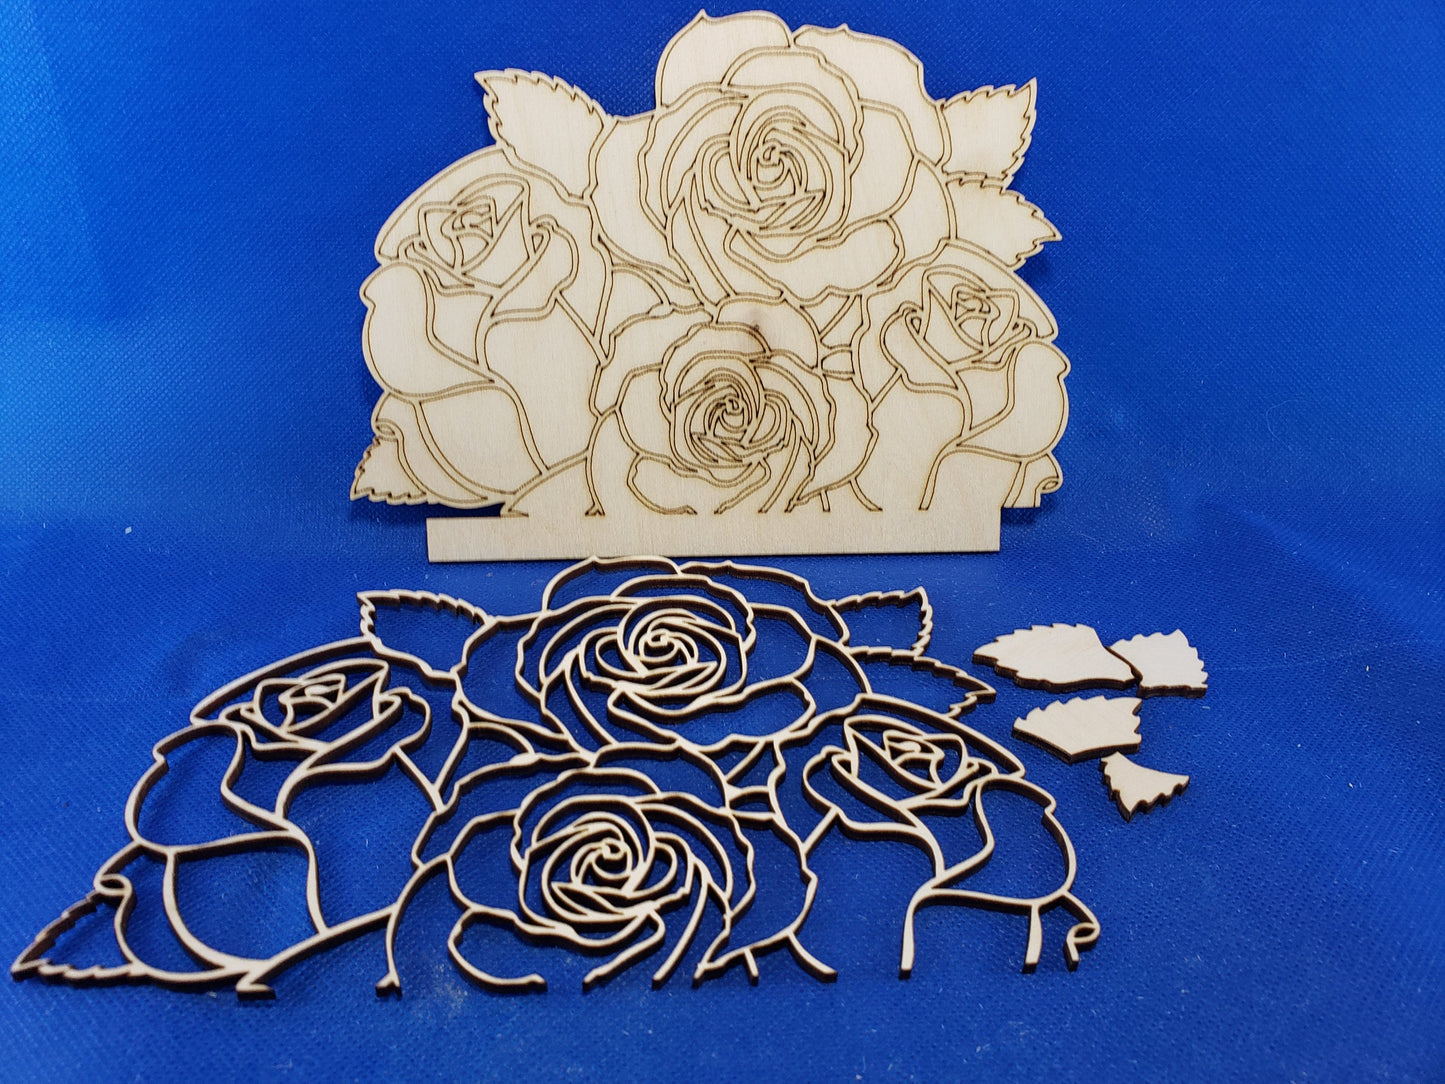 Roses Changeable Sign Insert - DIY unfinished Changeable sign insert